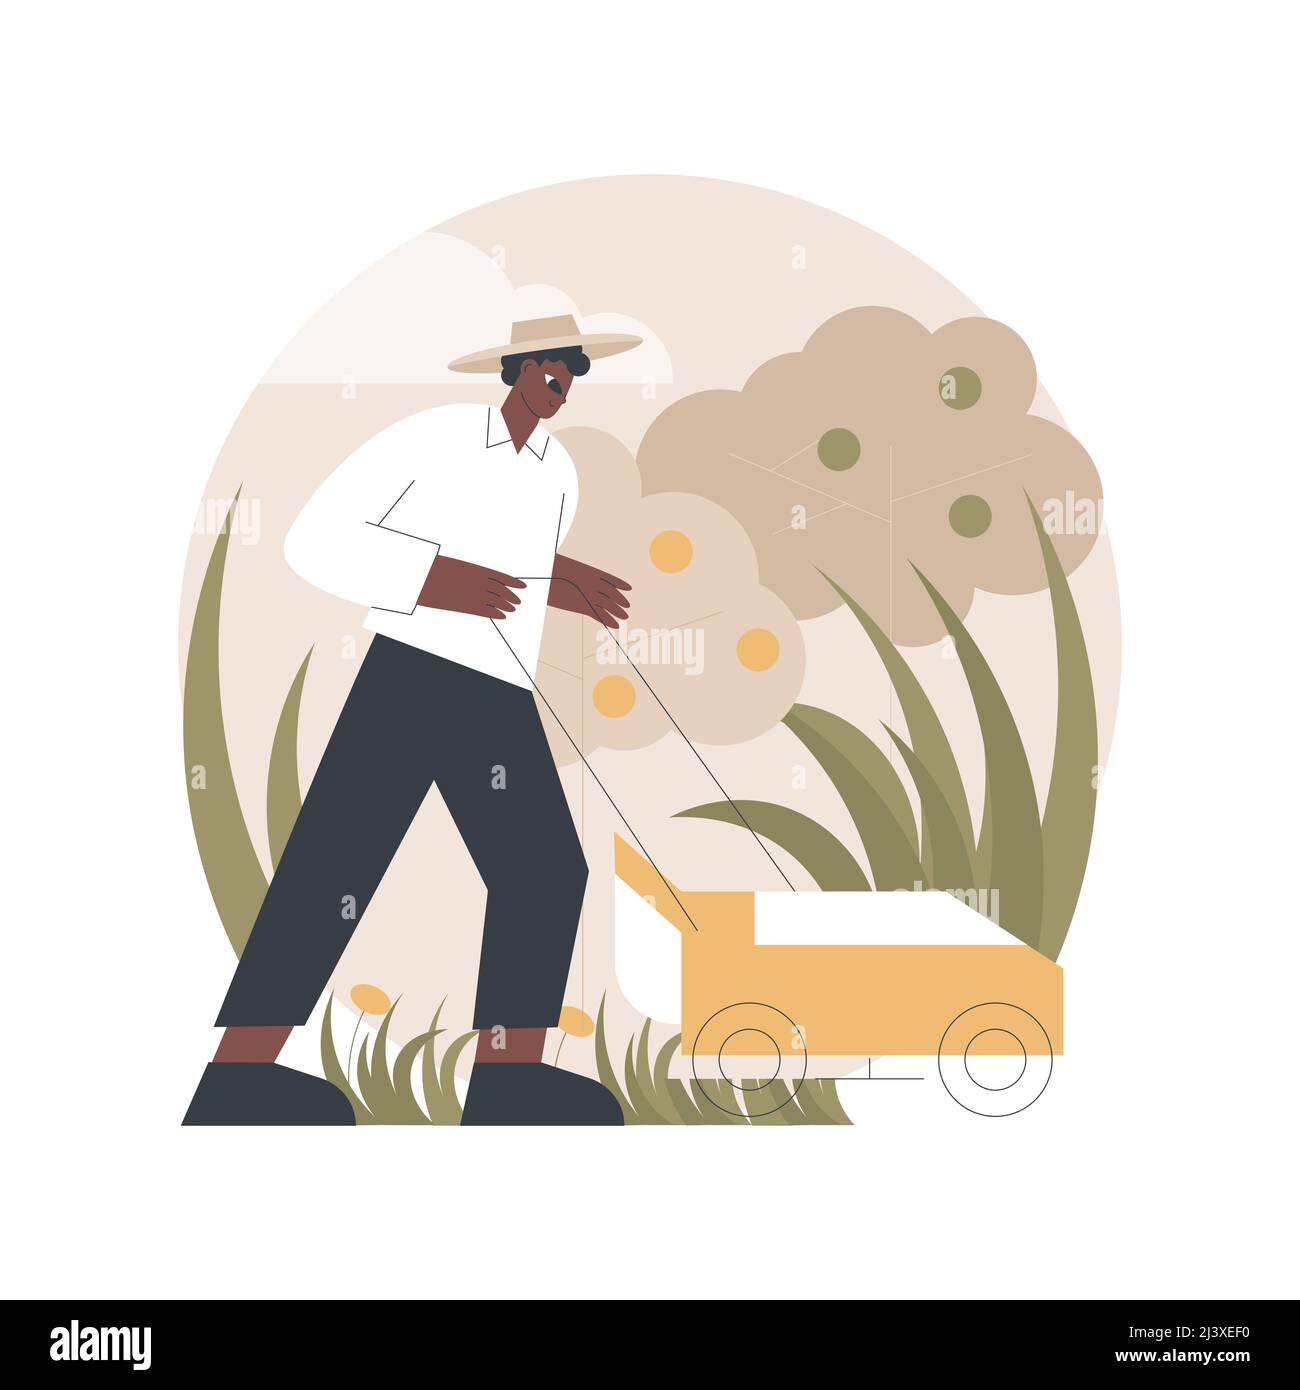 Lawn mowing service abstract concept vector illustration. Grass cutting and clean up, aeration and fertilizing, lawn weeding, gardening services, dand Stock Vector